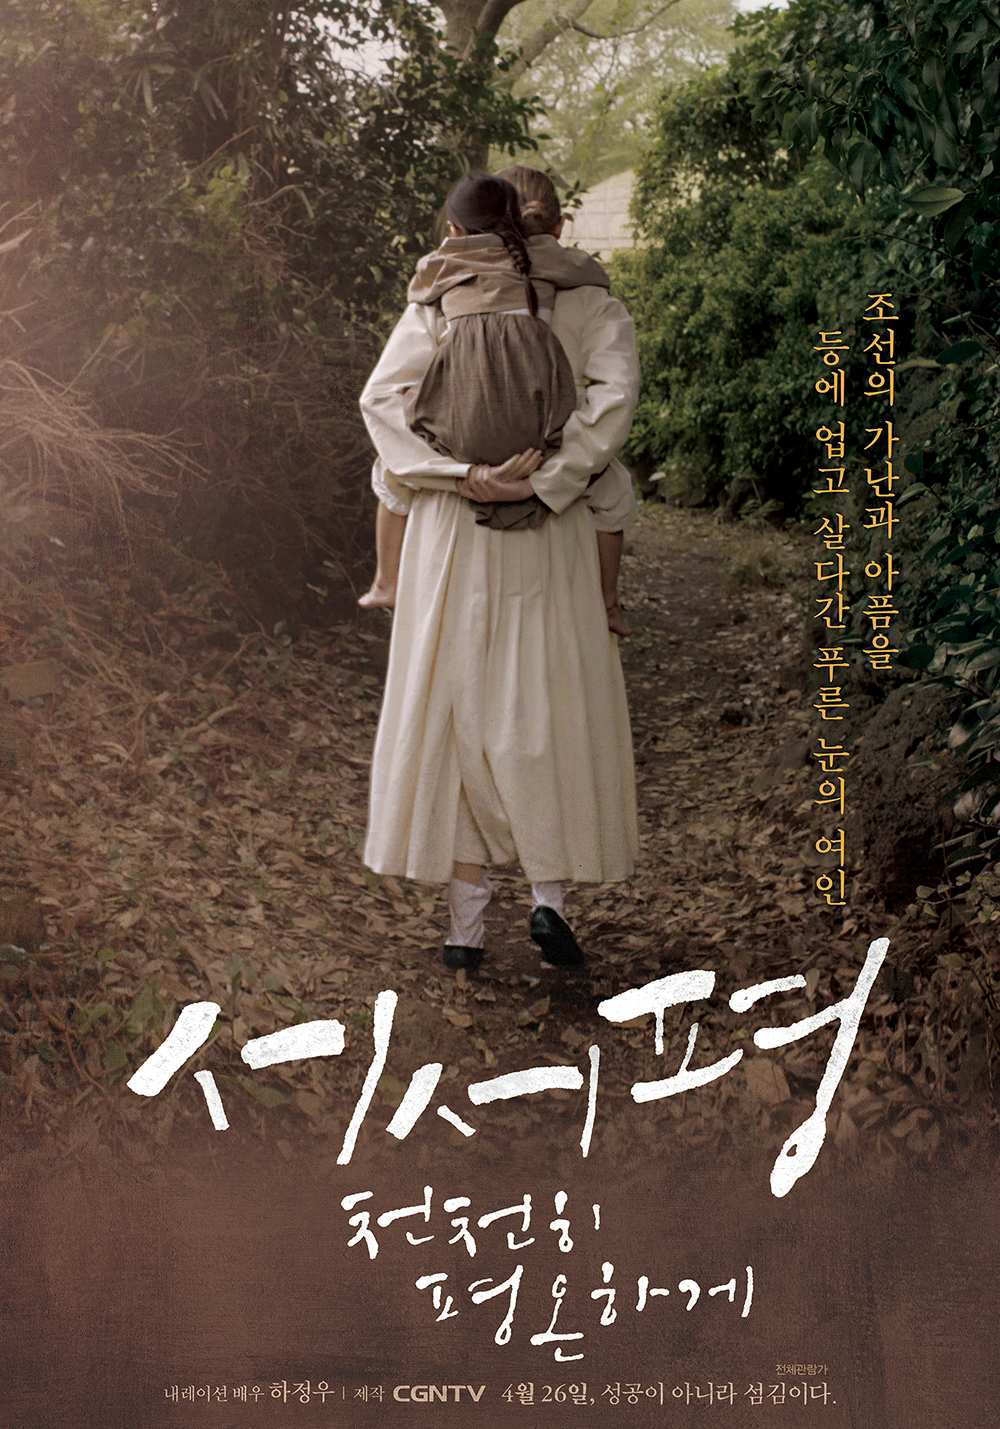 Suh-Suh Pyoung, Slowly And Peacefully Main Poster